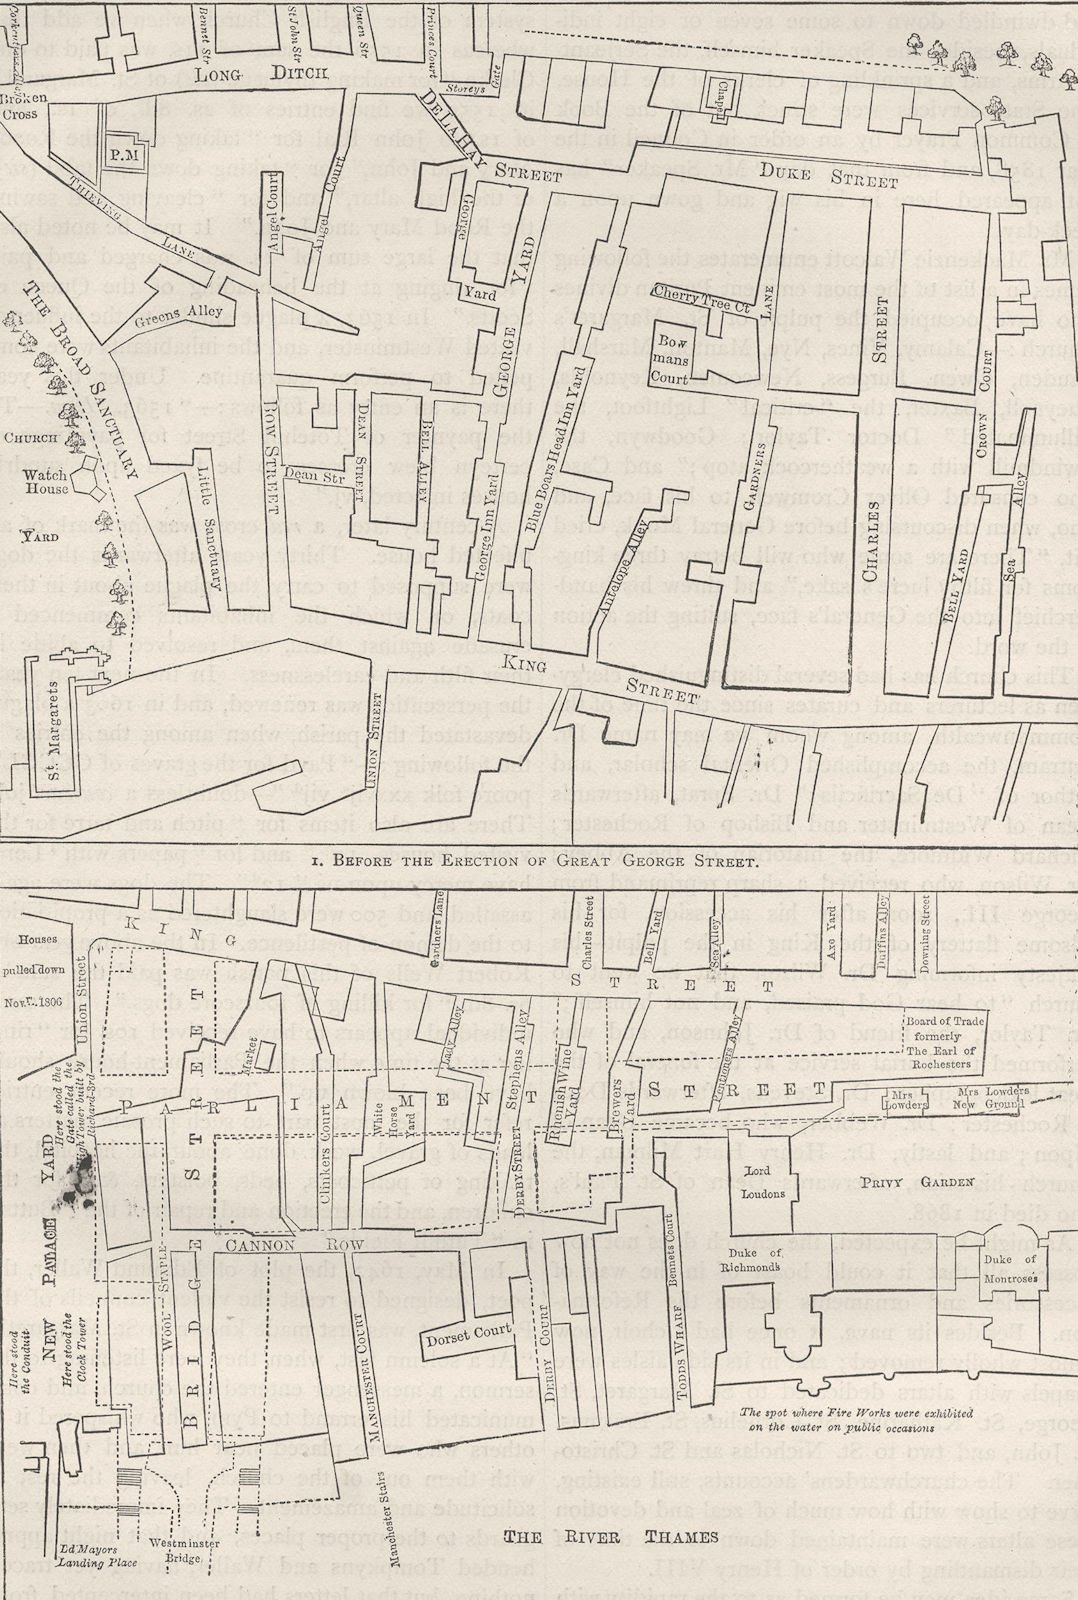 WESTMINSTER. Plan of a portion of Westminster between 1734 and 1748 c1880 map